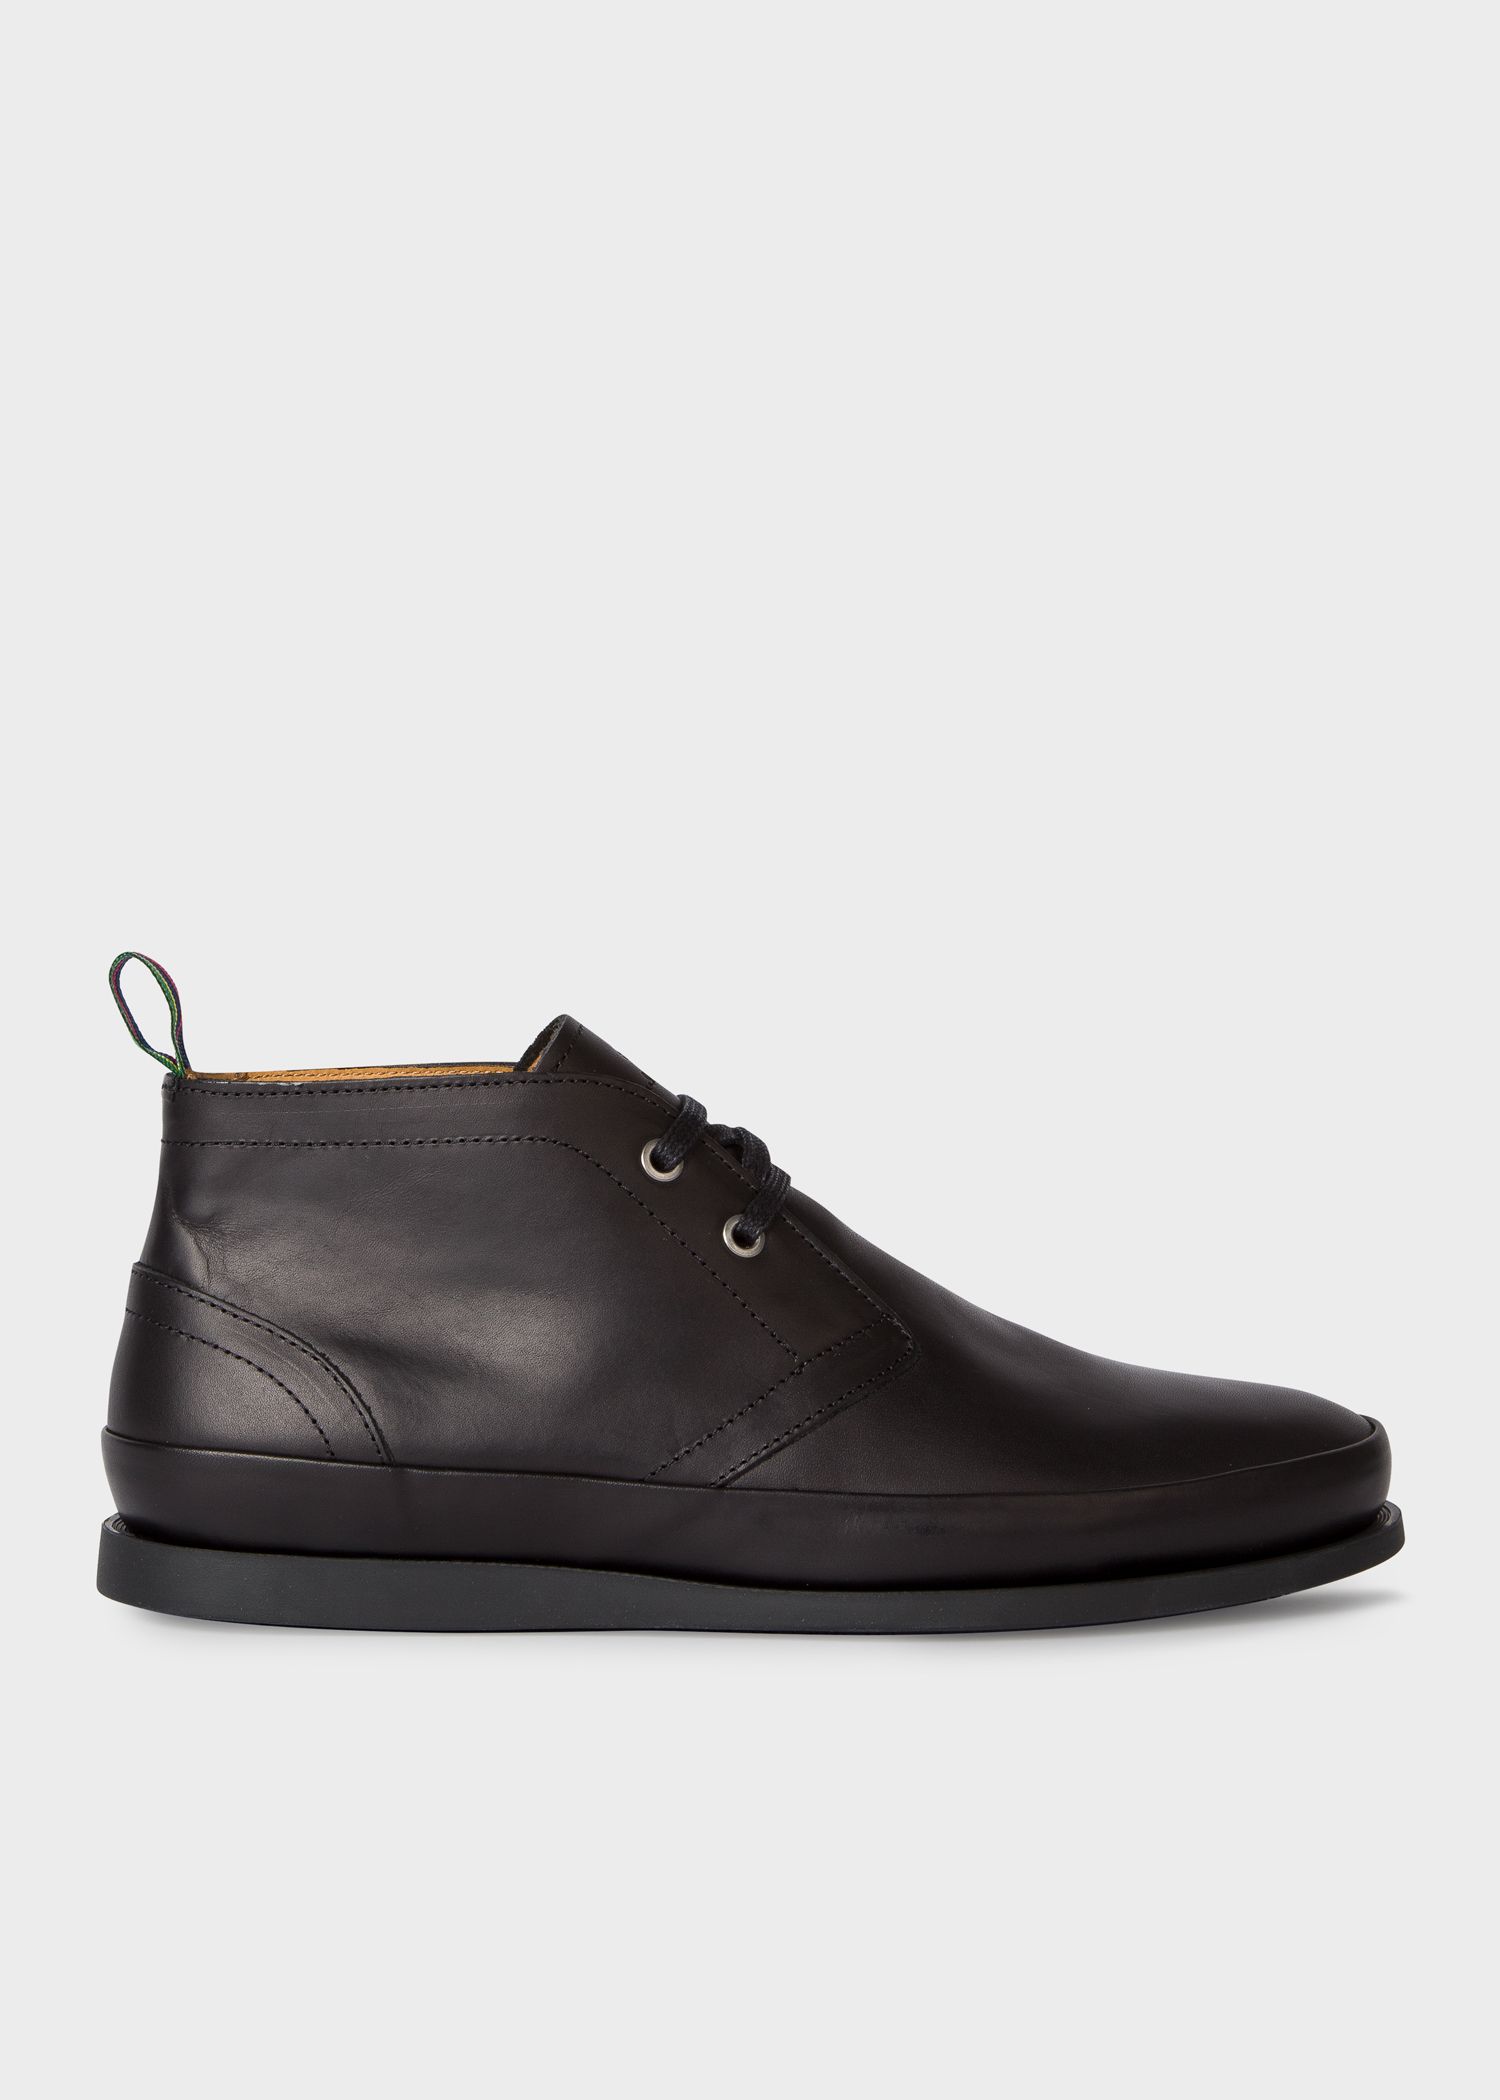 Men's Black Leather 'Cleon' Boots - Paul Smith US